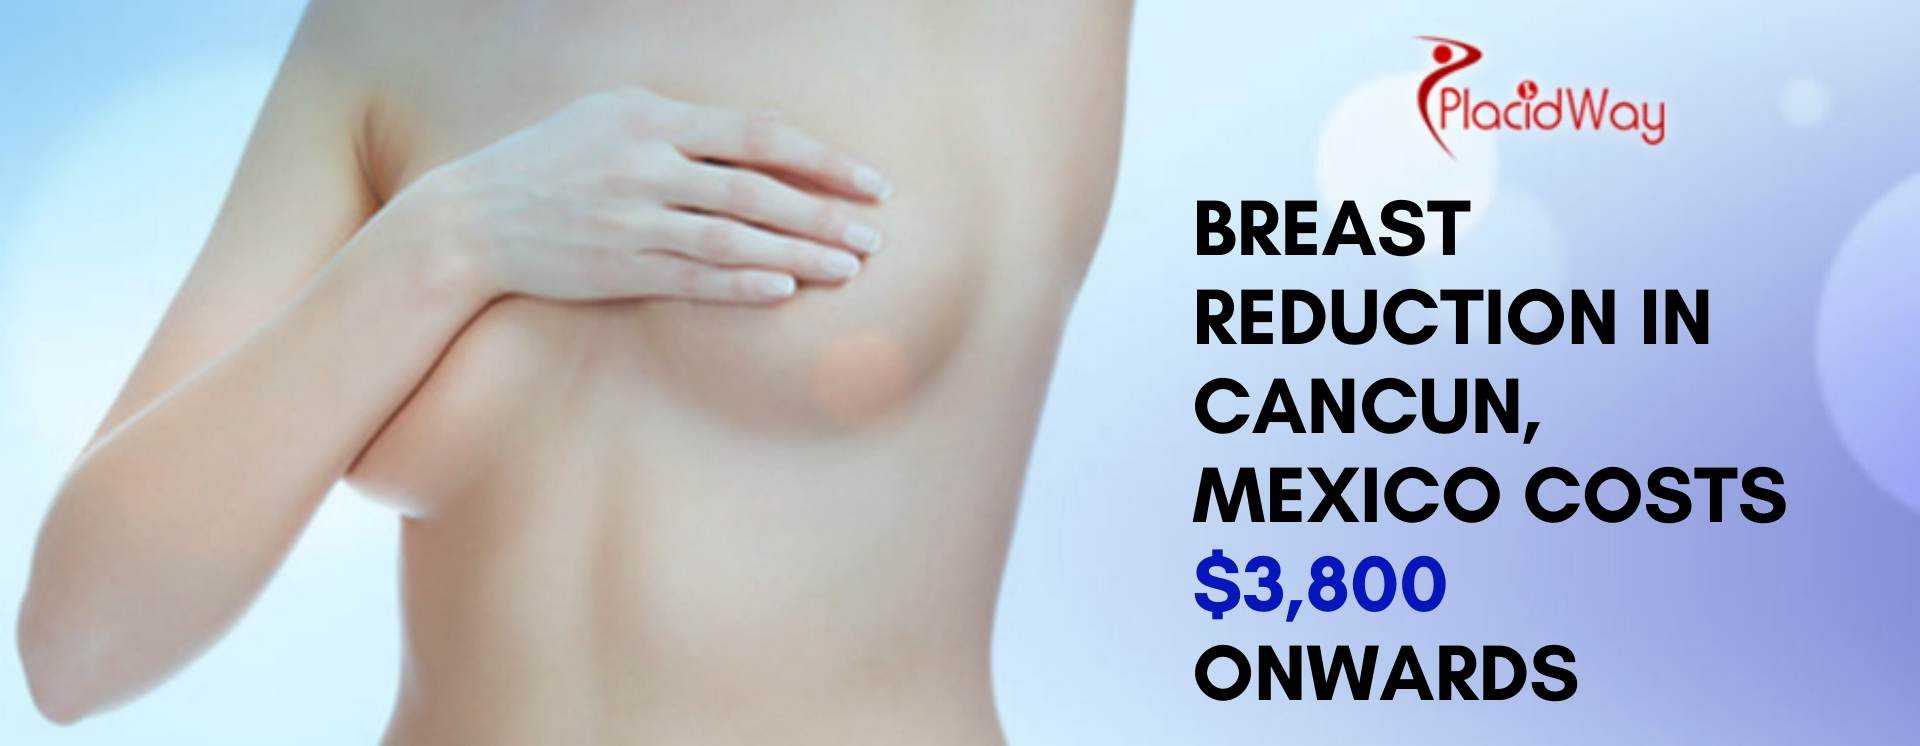 Breast Reduction cost in Cancun Mexico